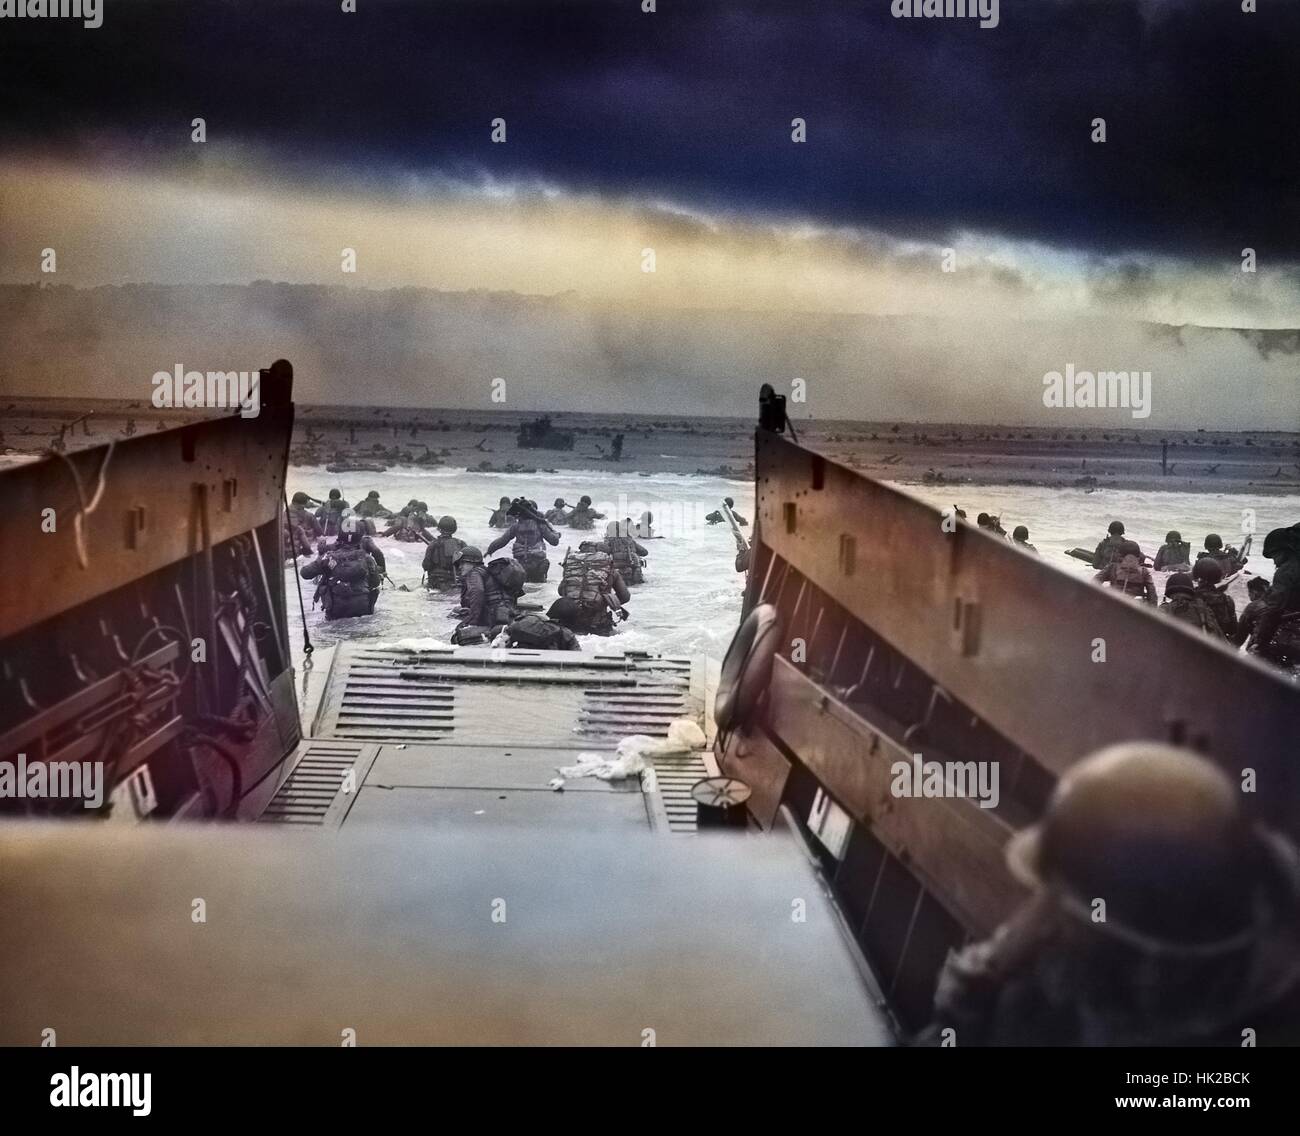 Digitally colorized image of Into the Jaws of Death, a photograph by Robert F Sargent of the United States Army First Infantry Division disembarking from an LCVP (landing craft) onto Omaha Beach during the Normandy Landings on D Day during World War 2, June 6, 1944. Stock Photo